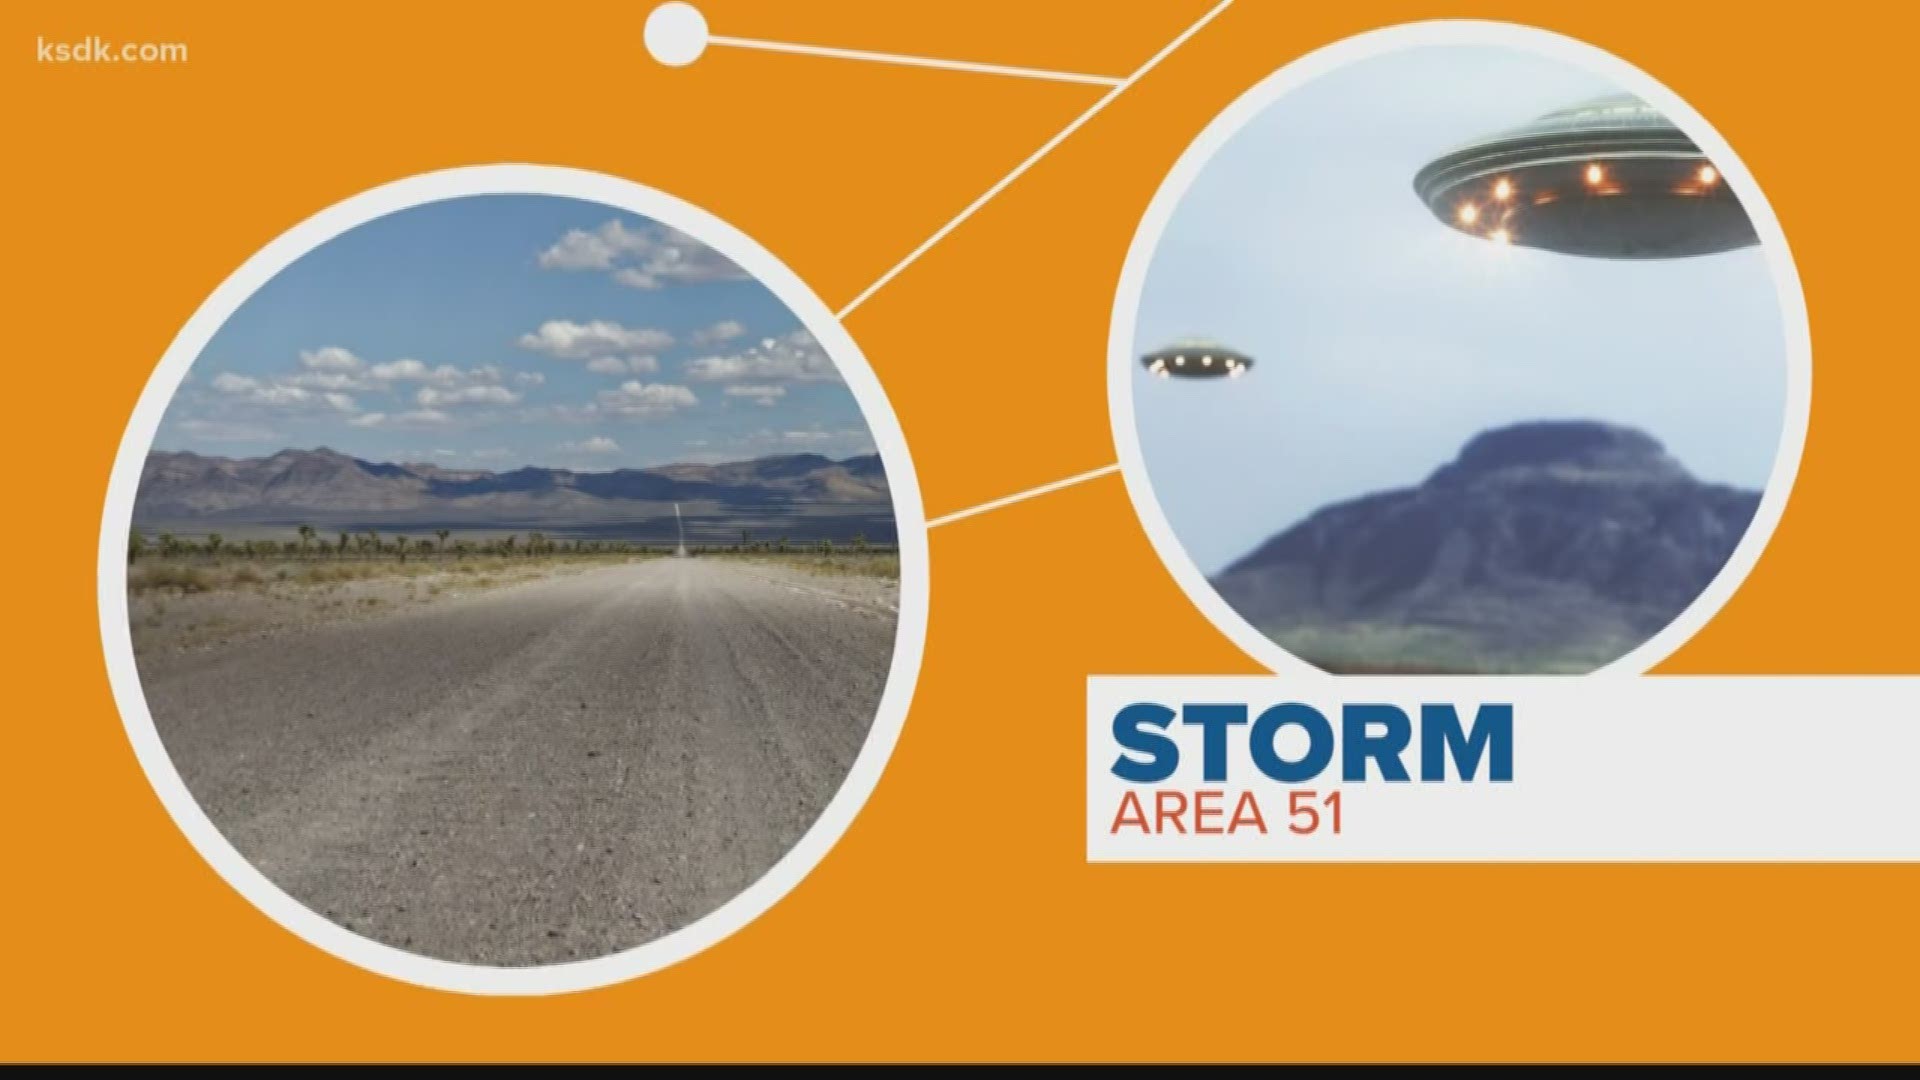 "Storm Area 51" is supposed to be a joke, but some people are taking it more seriously than others.